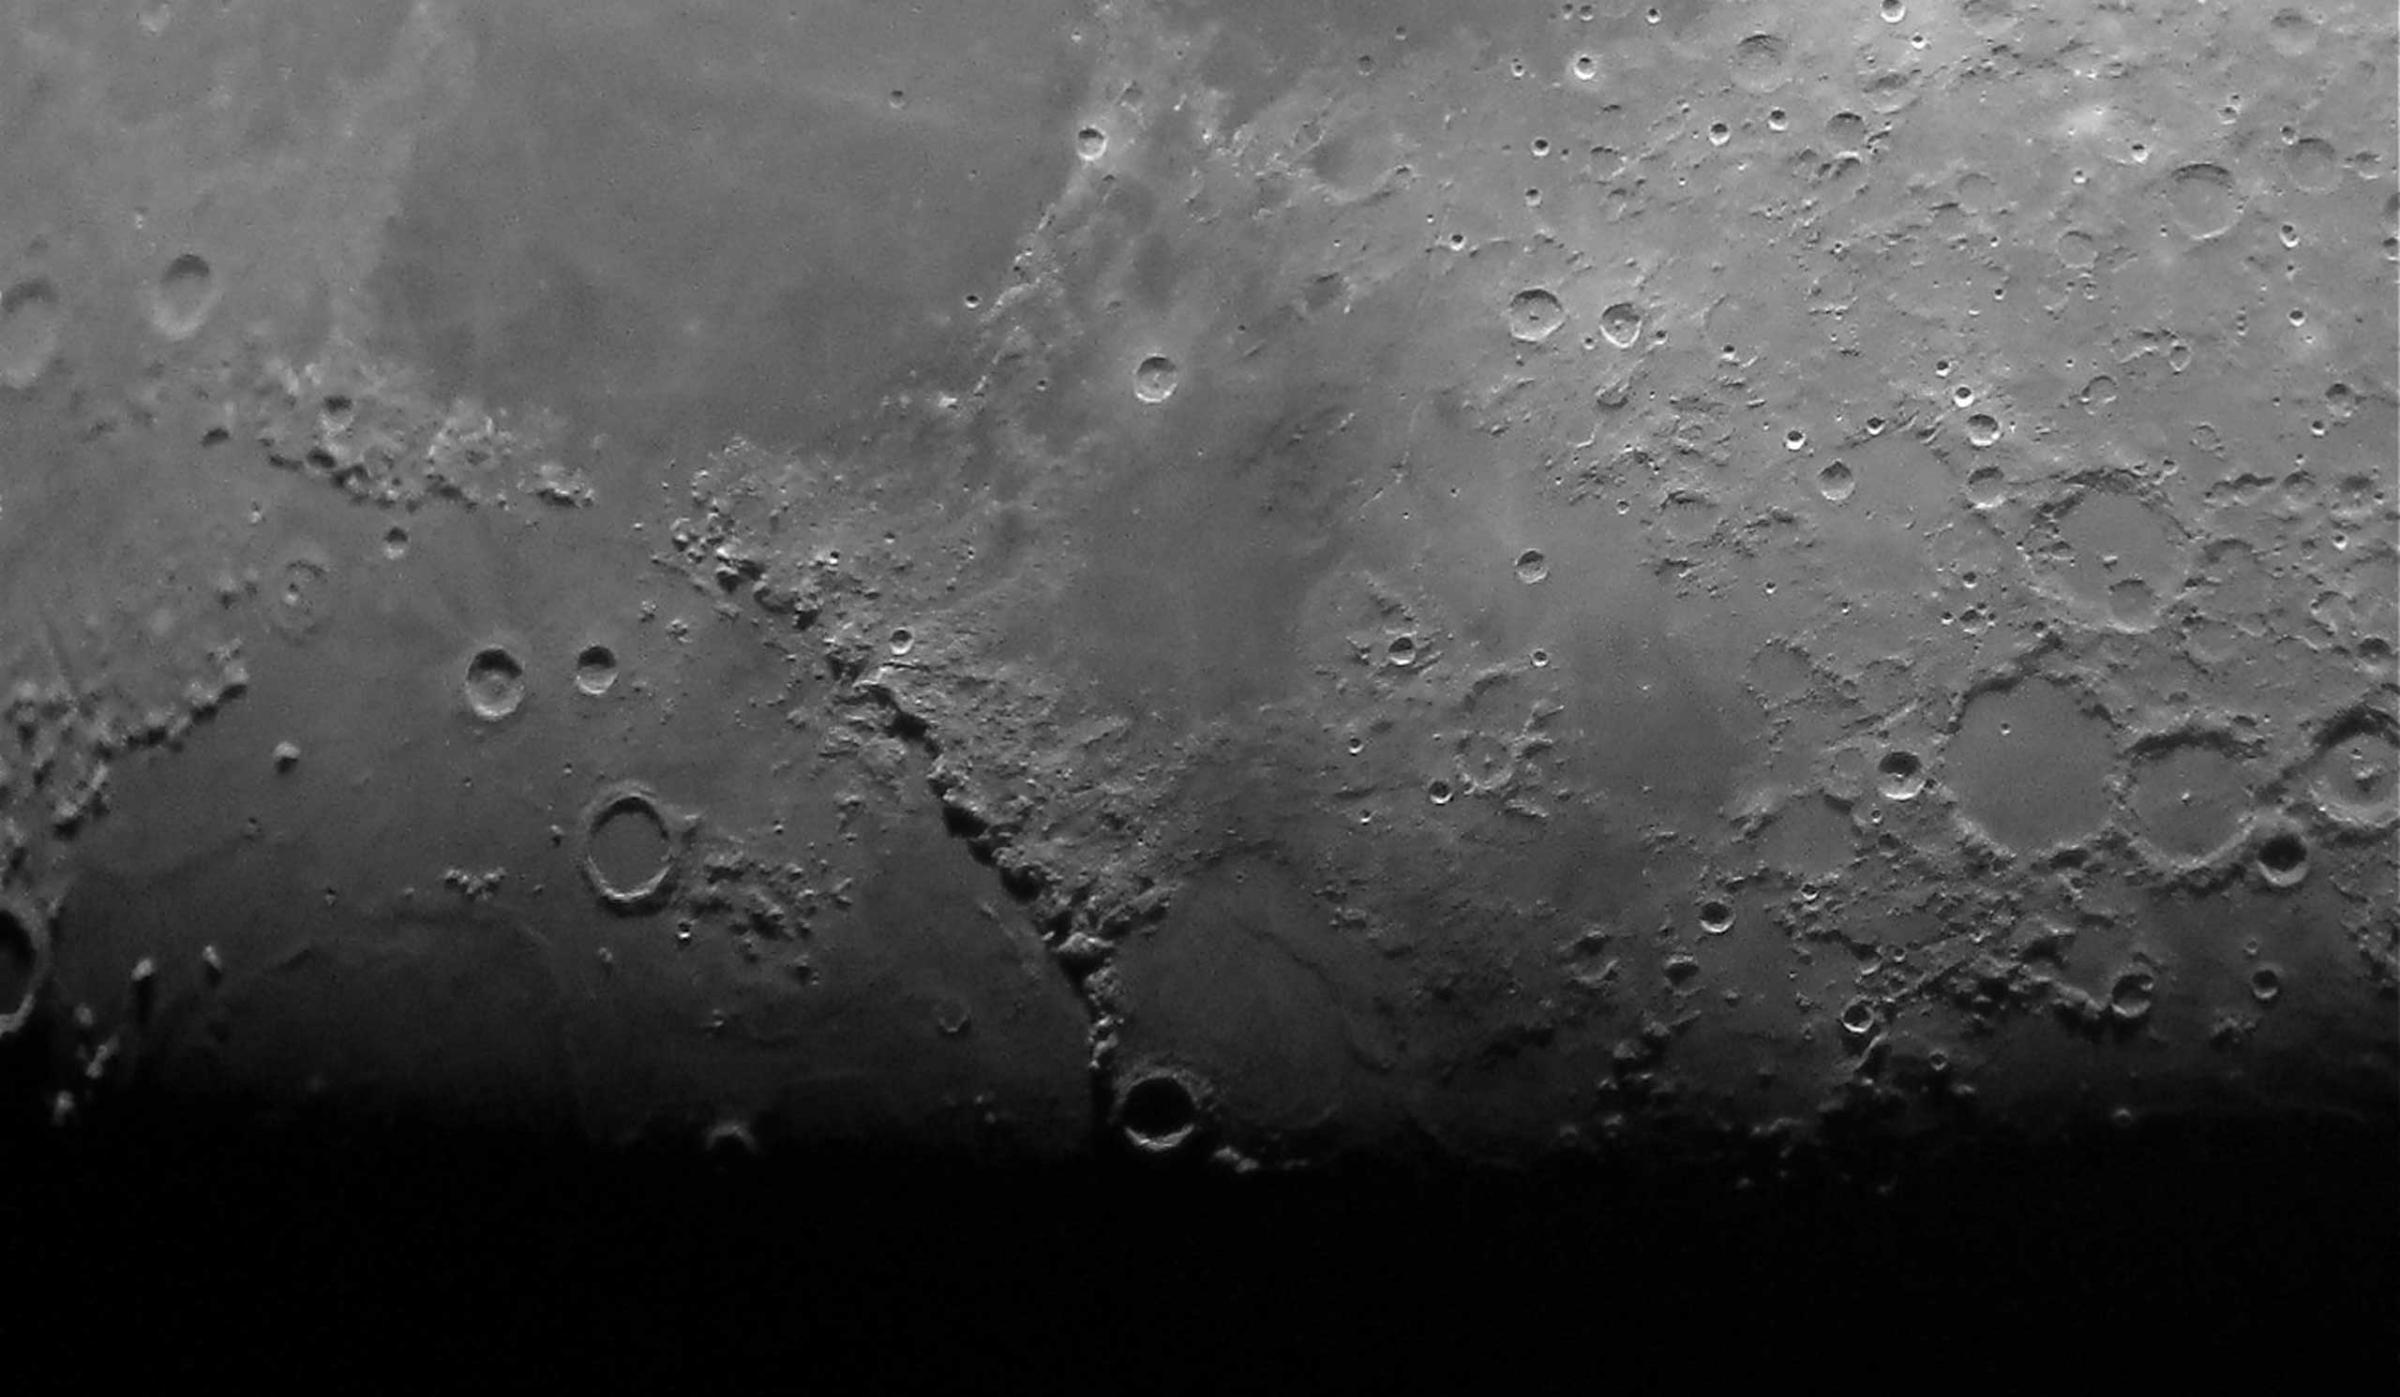 A beautifully sharp and artfully framed detail of the Moon. The terminator which separates the daytime and night-time parts of the Moon is aligned with the bottom edge of the photograph. The Sun's light shines at a low angle onto the surface of the Moon just above this line, showing the contrast between smooth maria and rugged crater rims to the best advantage.